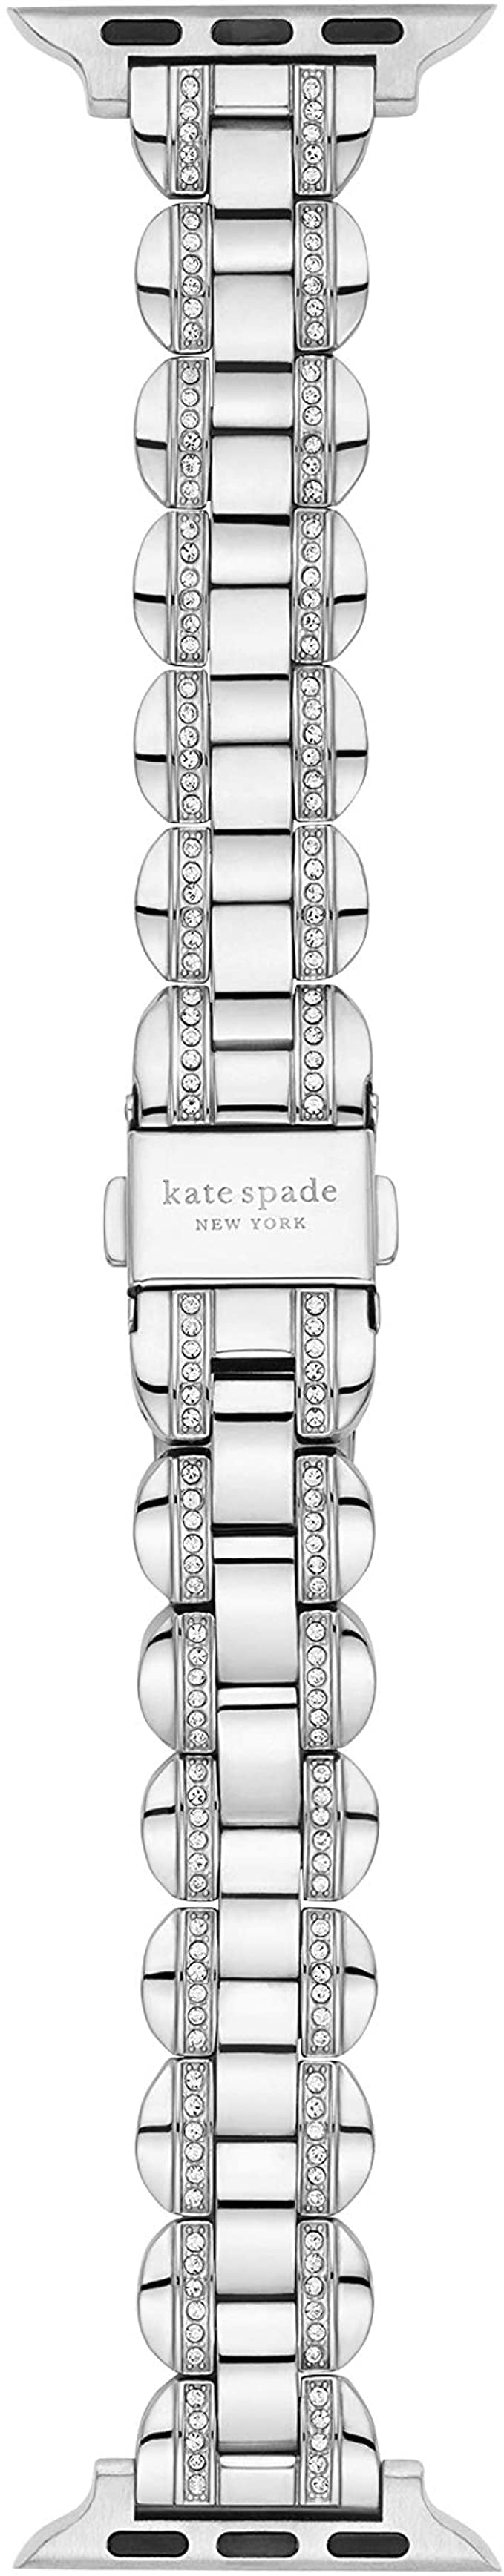 Kate Spade New York Interchangeable Stainless Steel Band Compatible with  Your 38/40MM Apple Watch- Straps for use with Apple Watch Series  1,2,3,4,5,6 